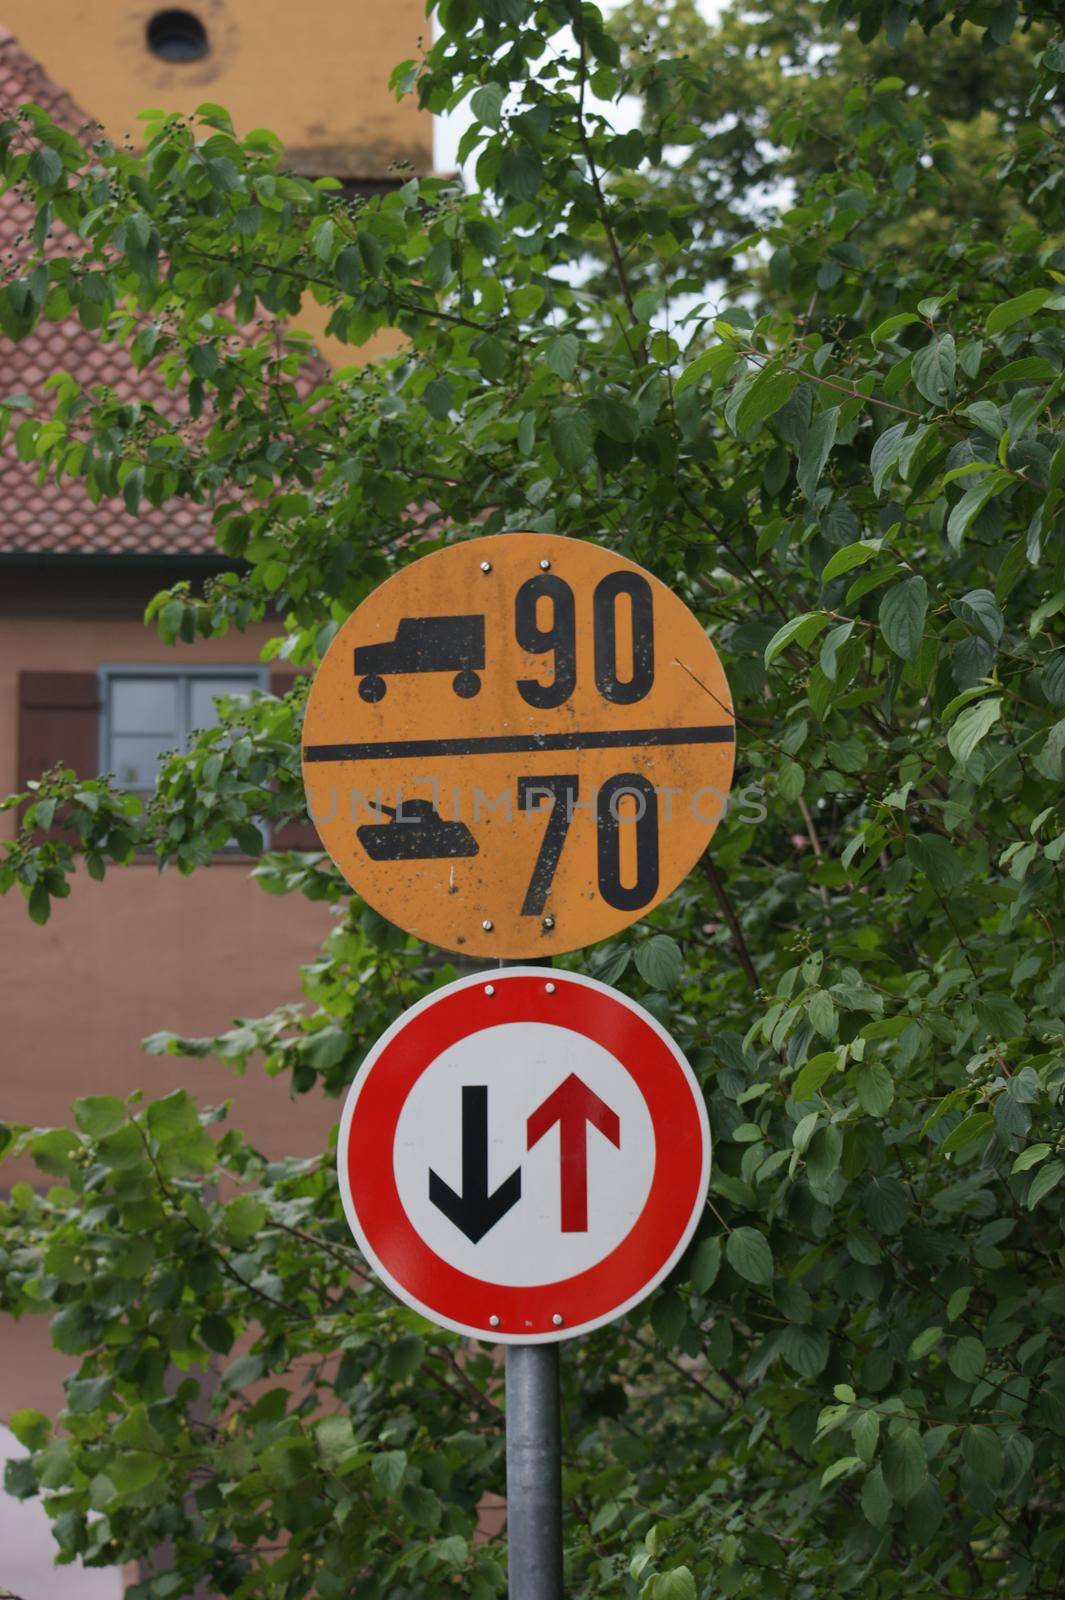 A German information road sign of the Federal Ministry of Defence about military load classification restrictions outside on a road in Bonn, Germany by LeoniekvanderVliet